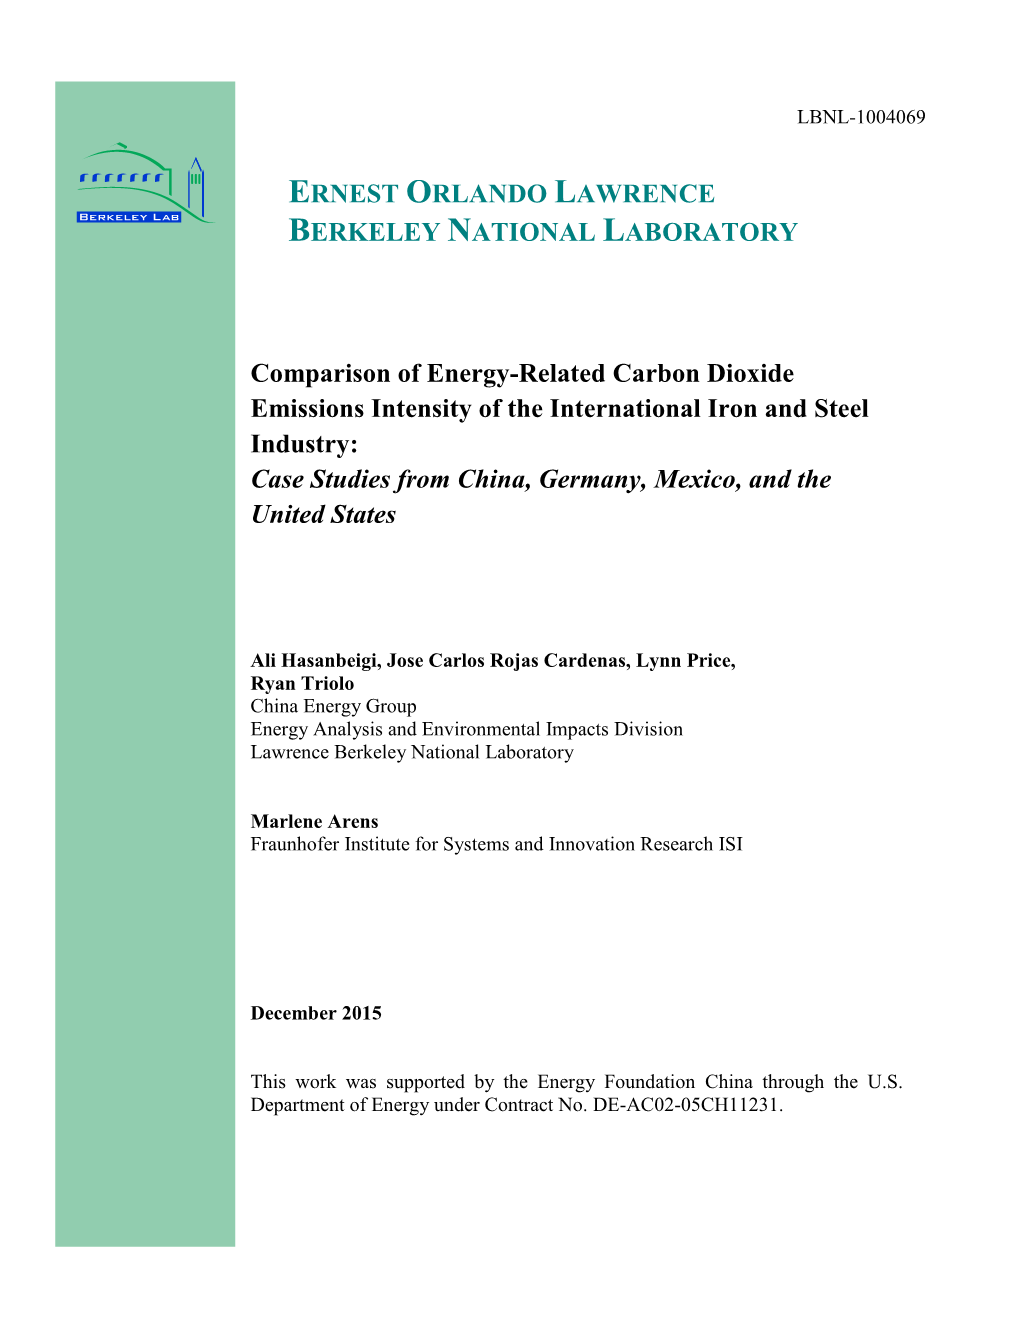 Comparison of Energy-Related Carbon Dioxide Emissions Intensity